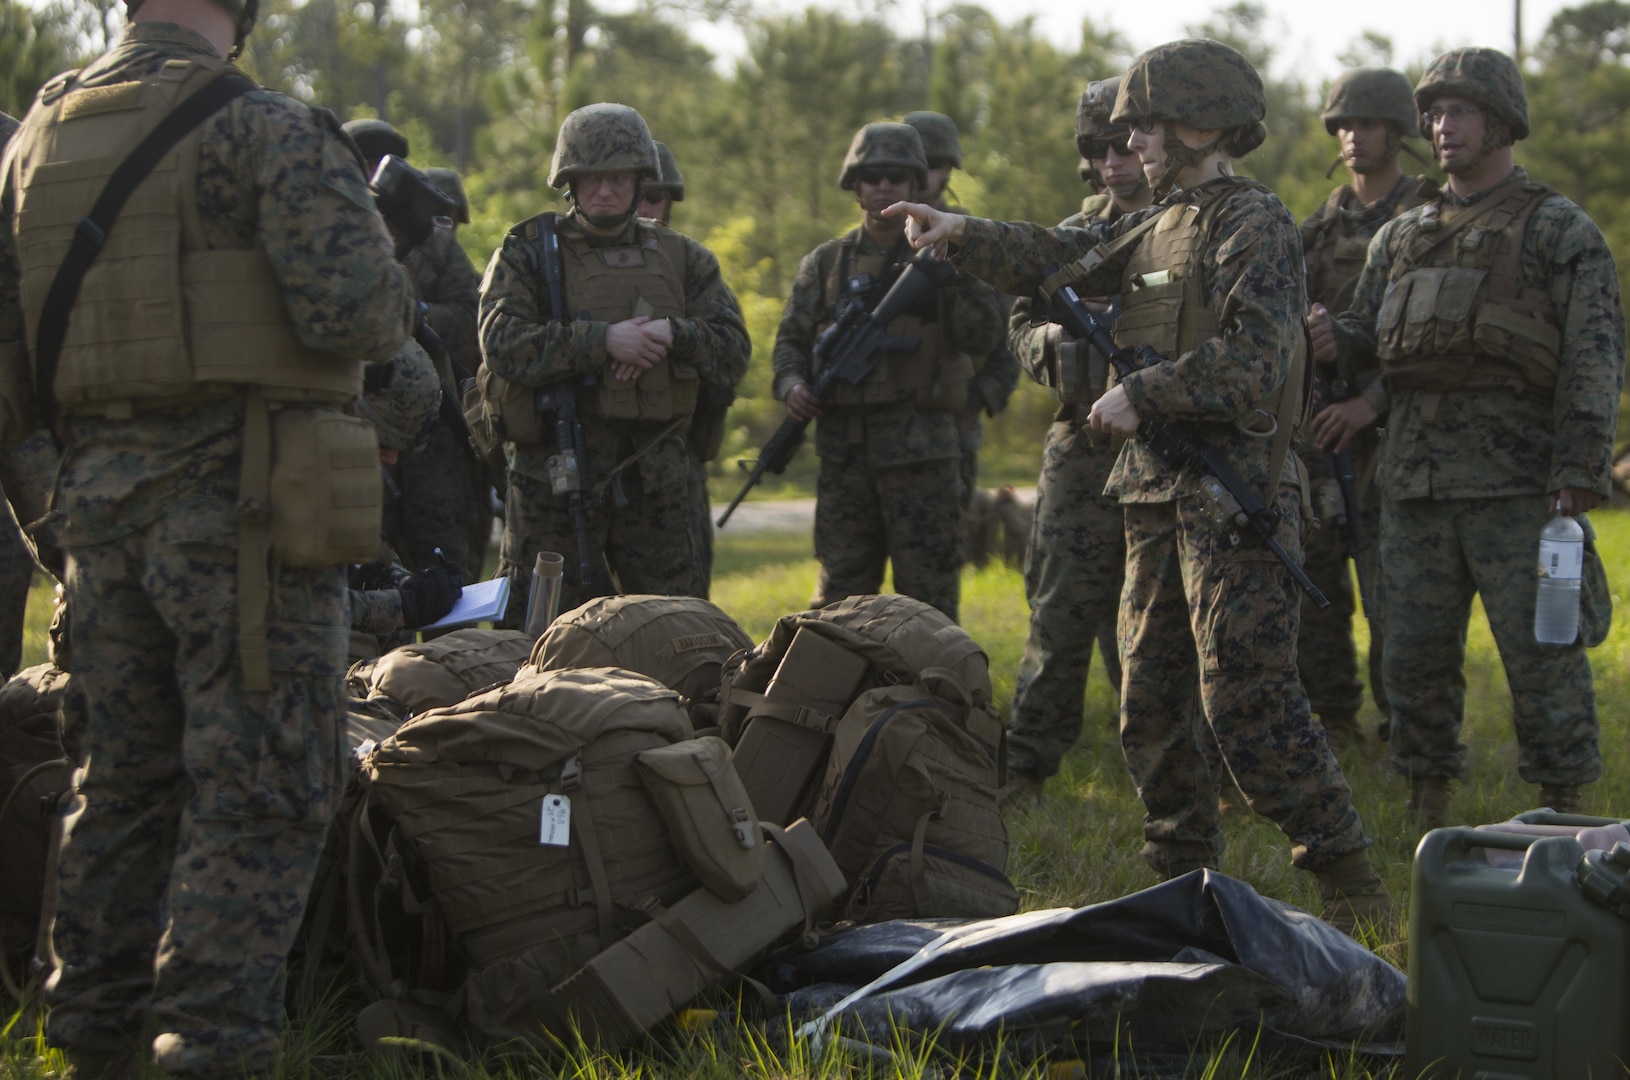 CAMP LEJEUNE, N.C. – Capt. Phoebe D. Riner, the staff judge advocate with the Command Element, Special Purpose Marine Air-Ground Task Force - Southern Command, explains the rules of engagement to Marines and sailors during General Exercise 2 at Marine Corps Base Camp Lejeune, North Carolina, April 29, 2017. The Marines simulated a noncombatant evacuation operation in order to prepare for crisis response situations they could face during their deployment to Central America. (U.S. Marine Corps photo by Sgt. Ian Leones)